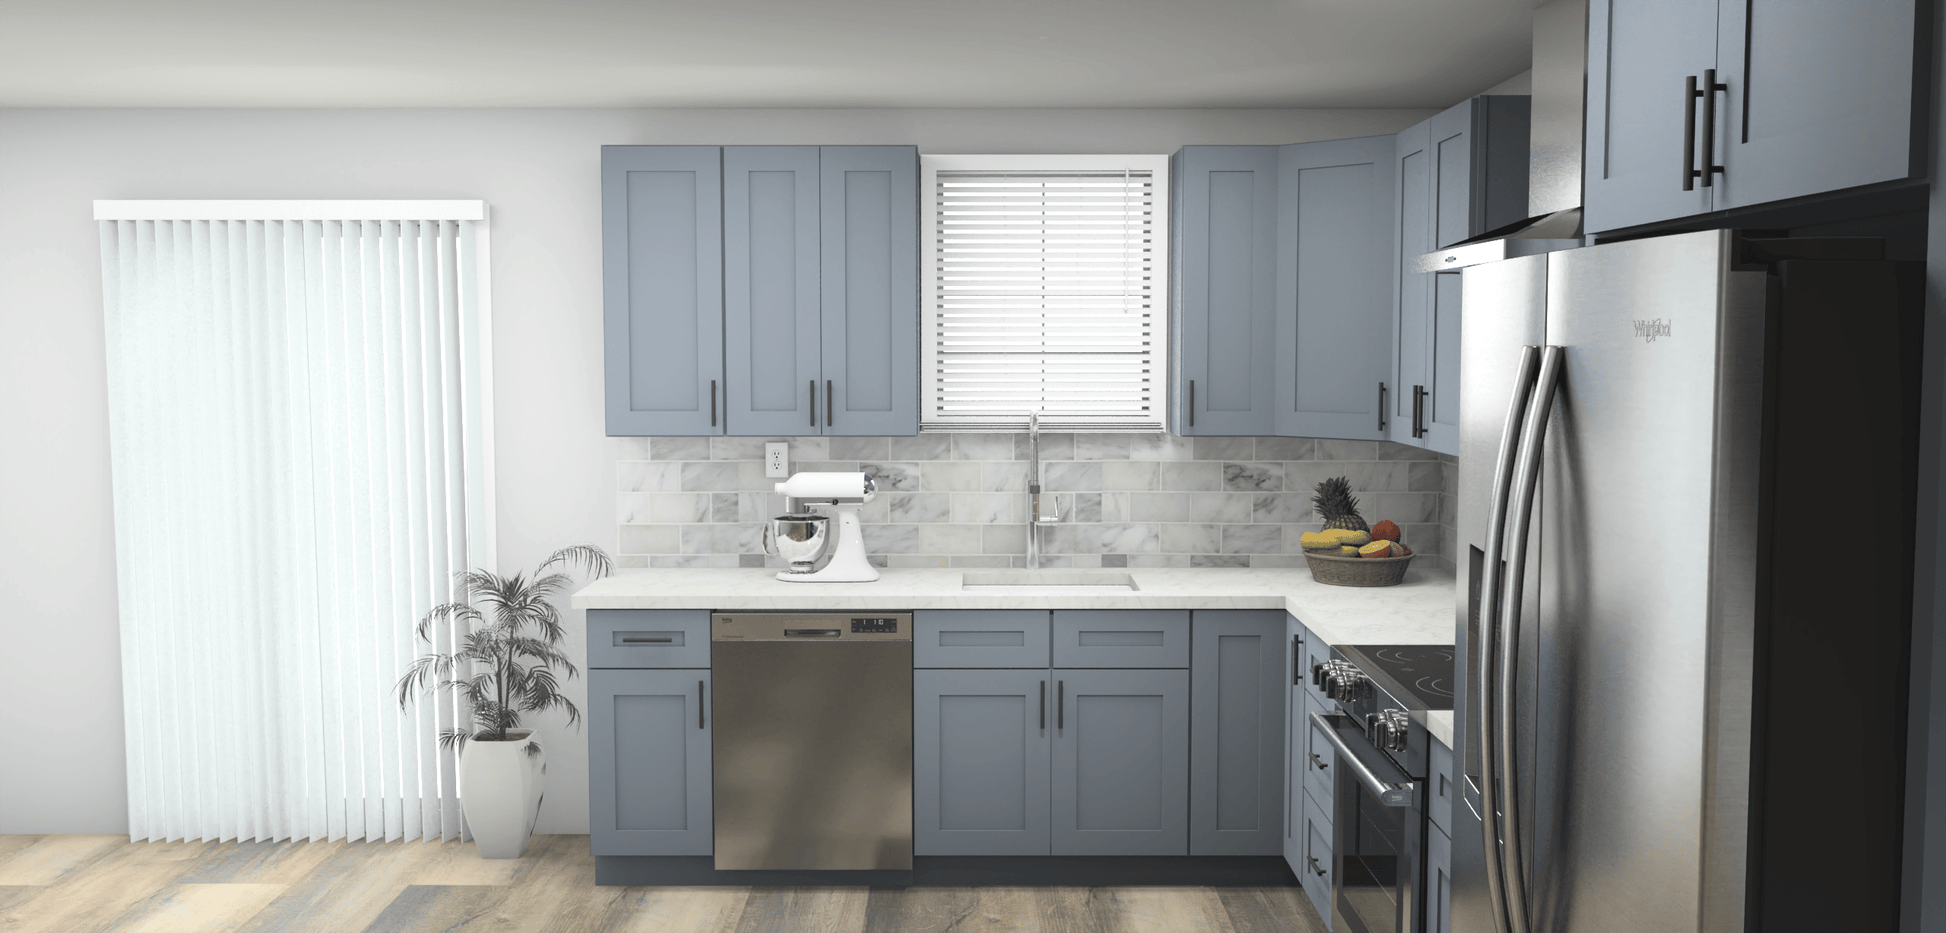 LessCare Colonial Gray 9 x 13 L Shaped Kitchen Side Layout Photo